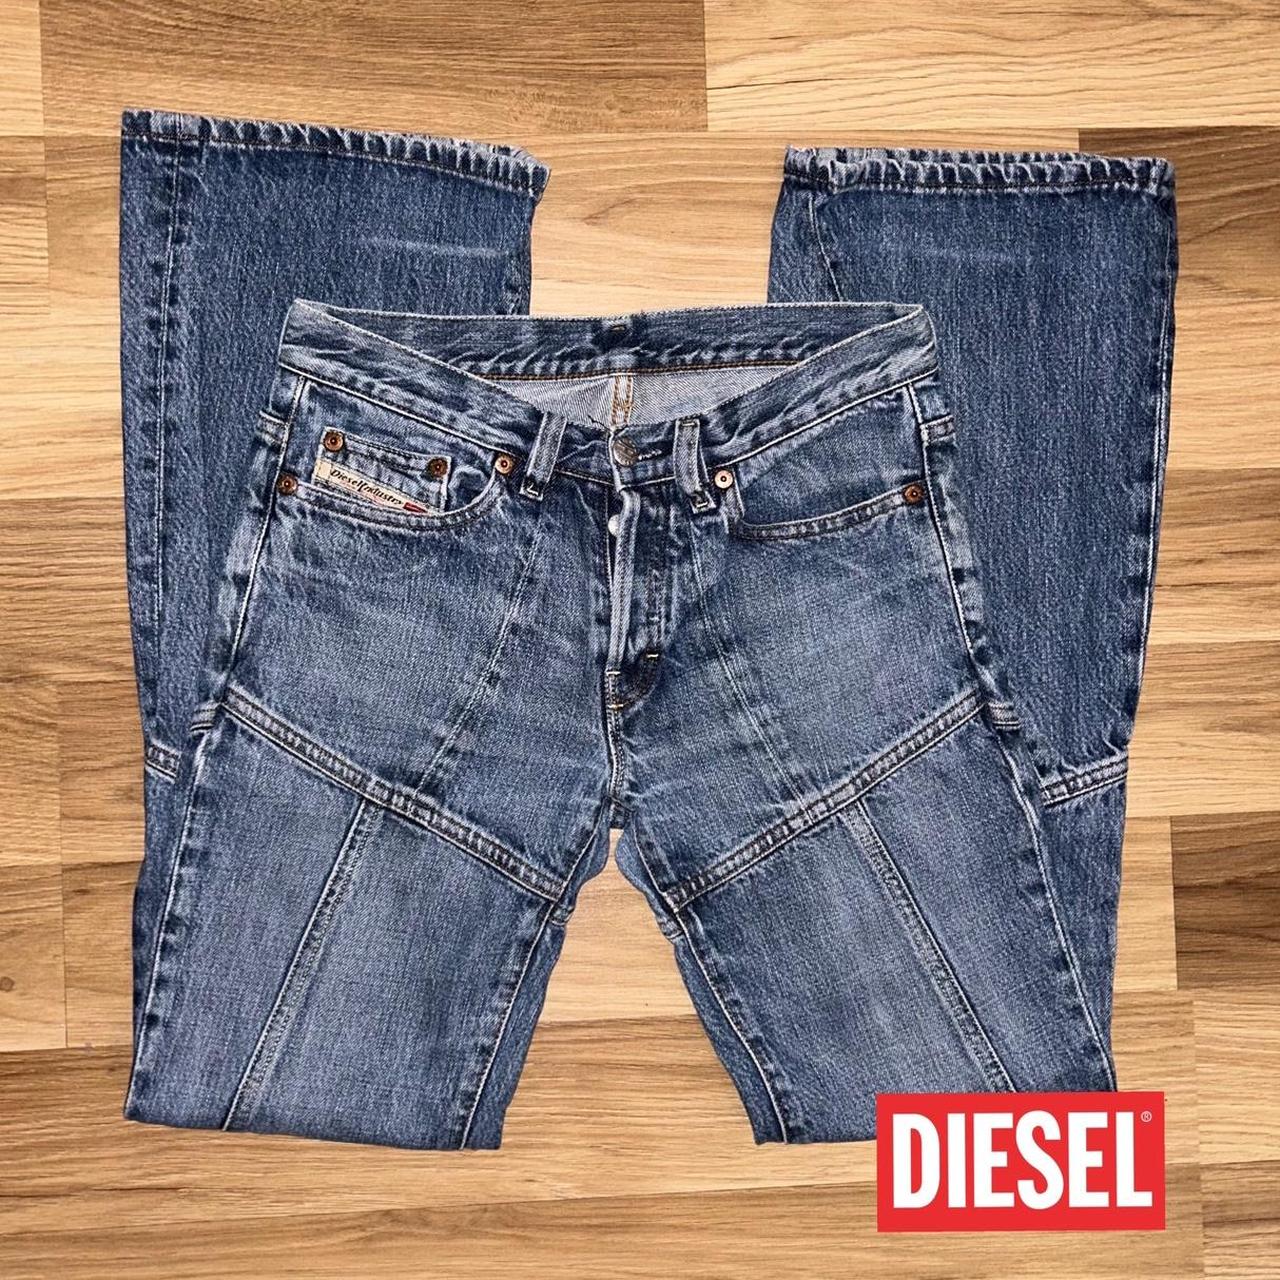 00s rare bootcut diesel patchwork jeans, check 5th - Depop